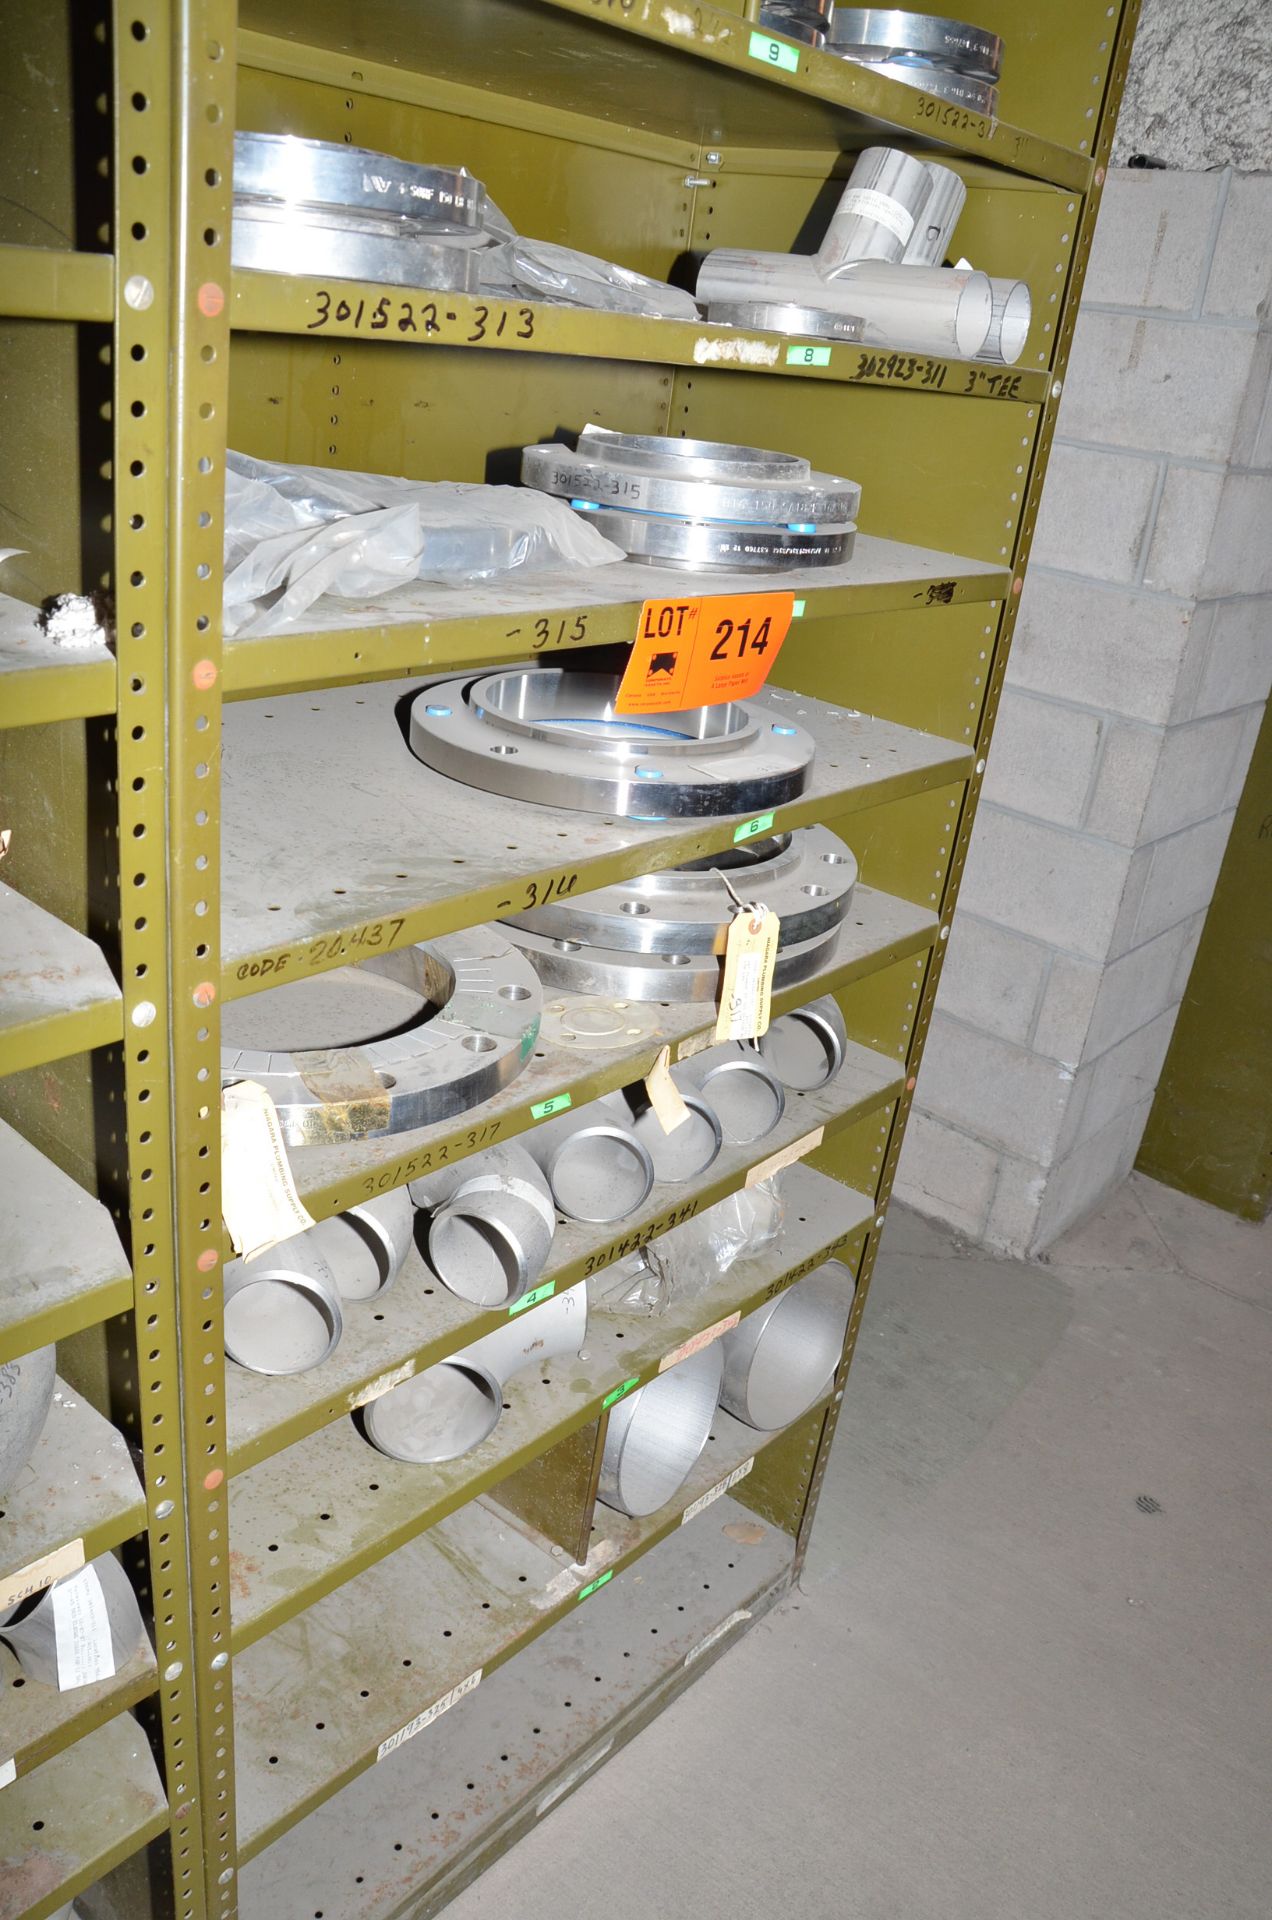 LOT/ CONTENTS OF SHELF - INCLUDING PIPE FLANGES, PIPE ELBOWS [RIGGING FEE FOR LOT #214 - $TBD USD